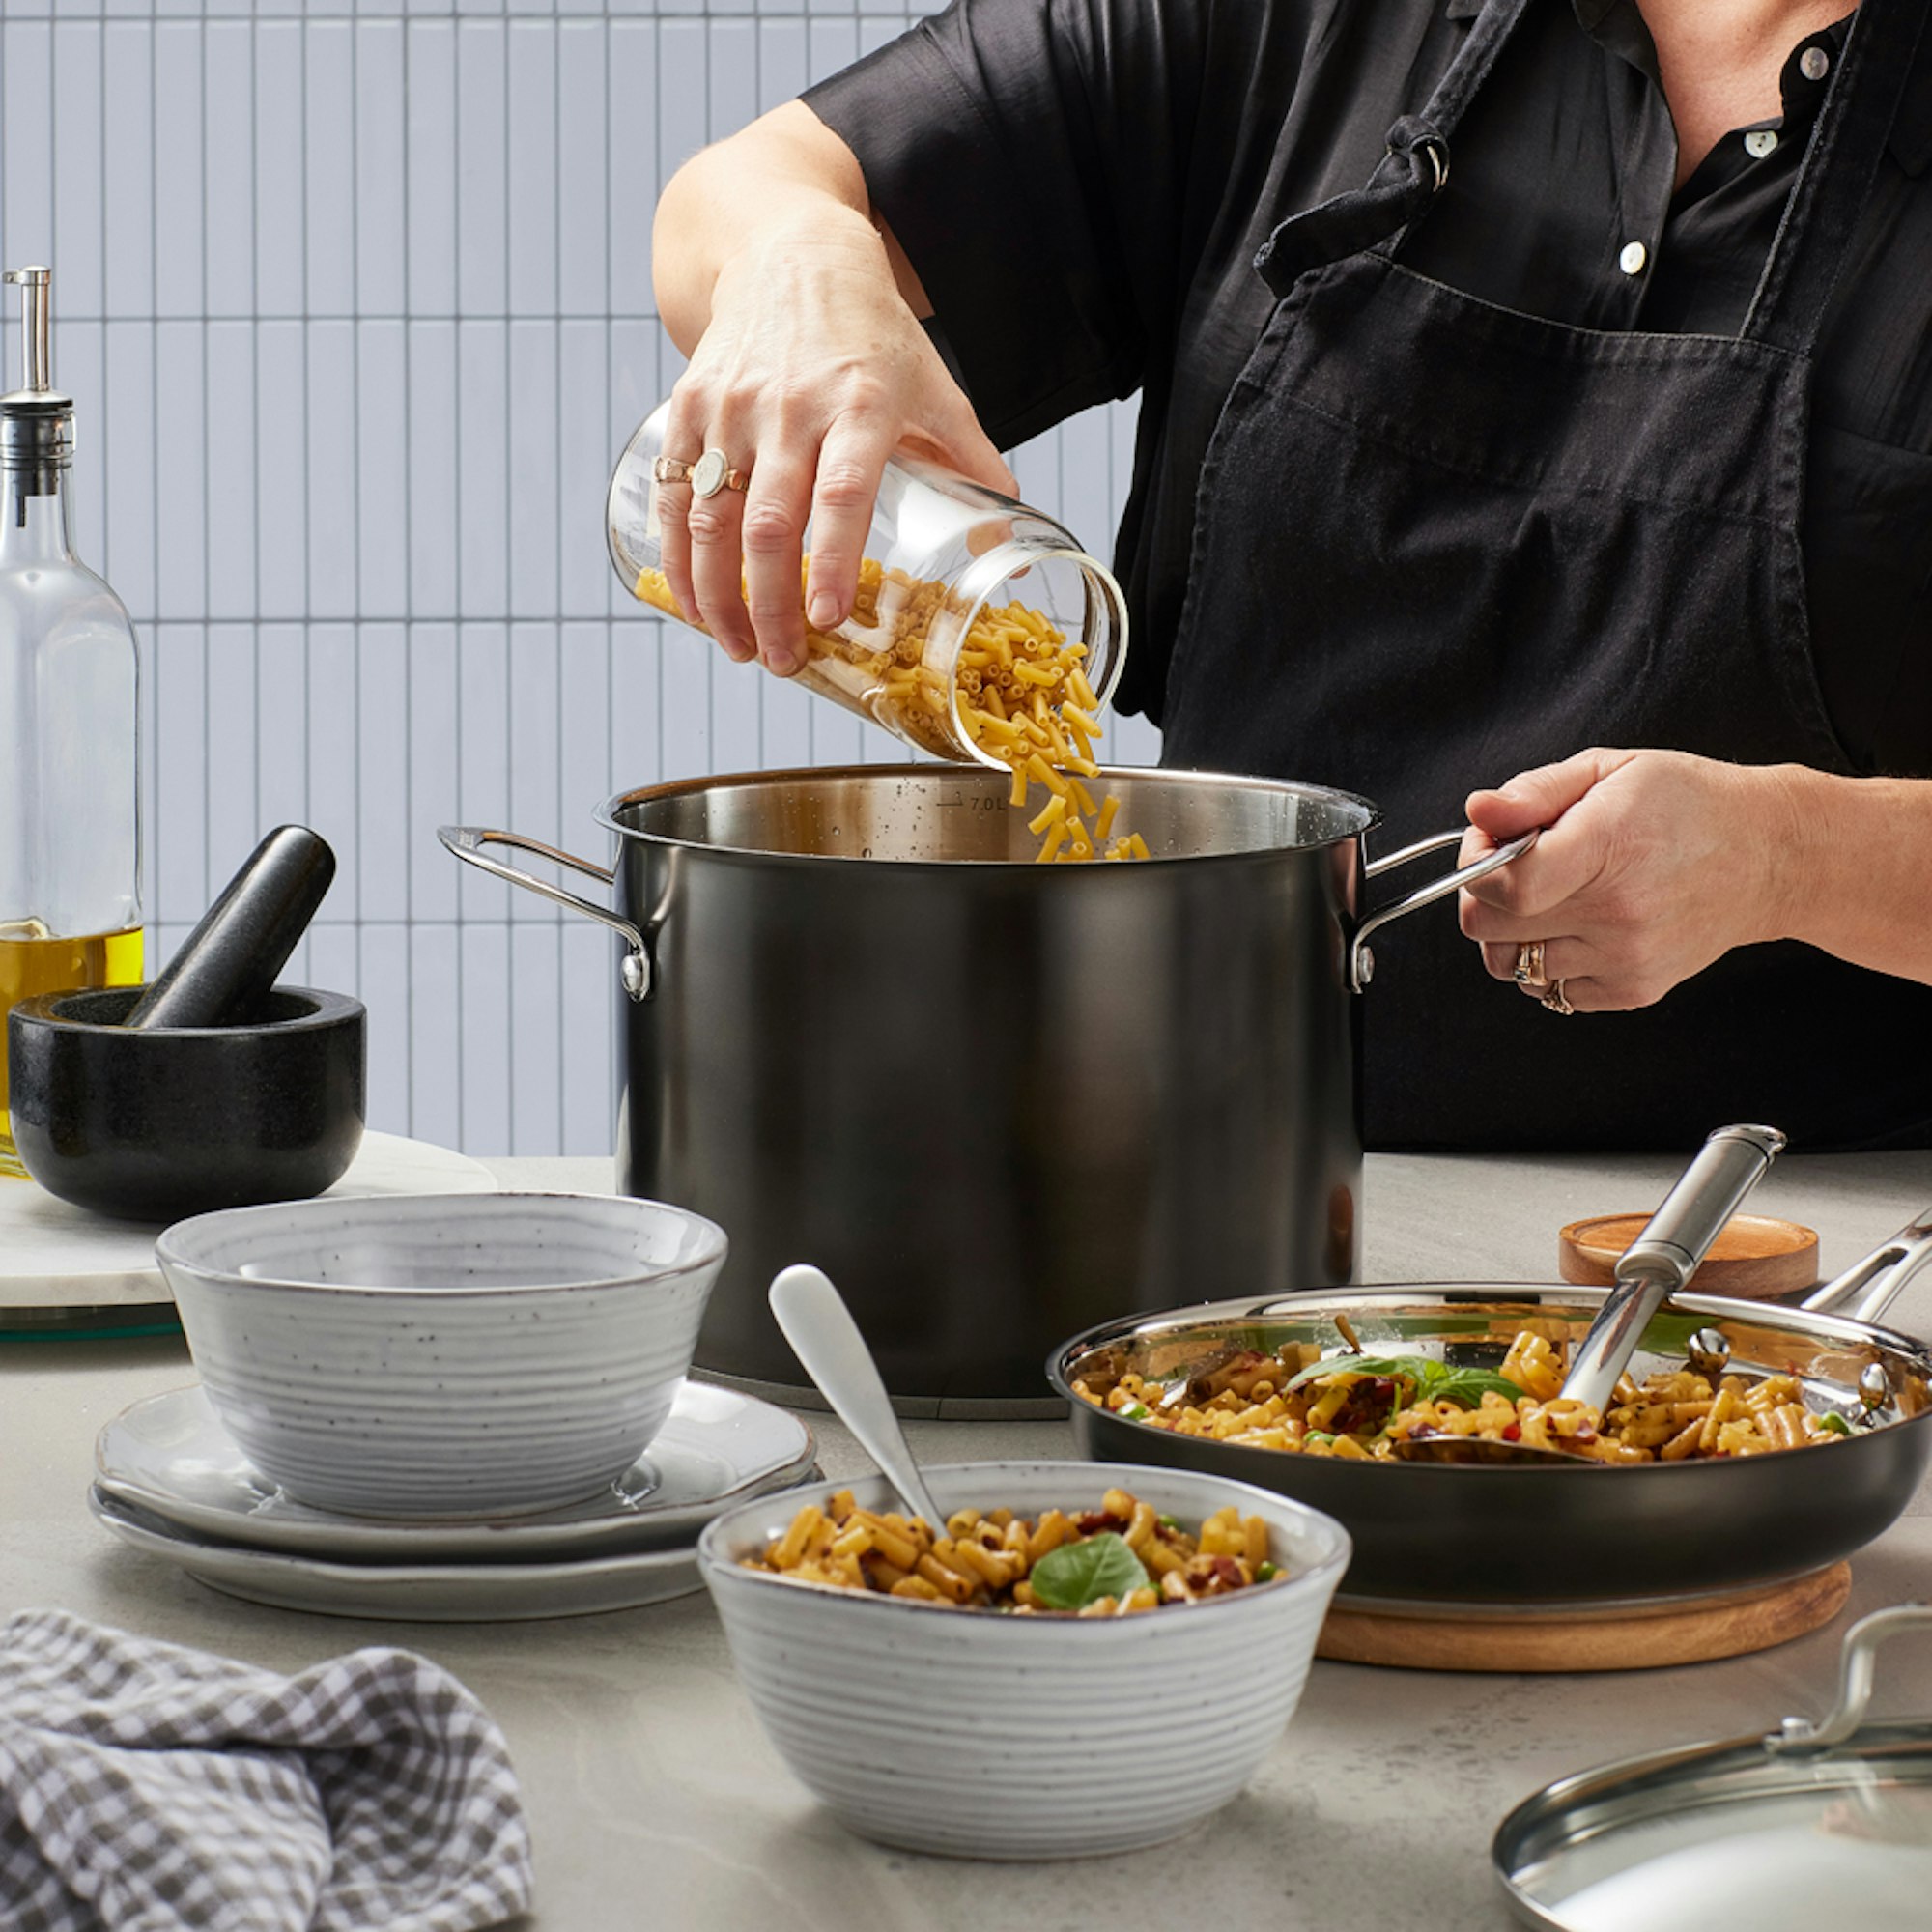 Cooking lifestyle photo woman pouring pasta into a black stock pot